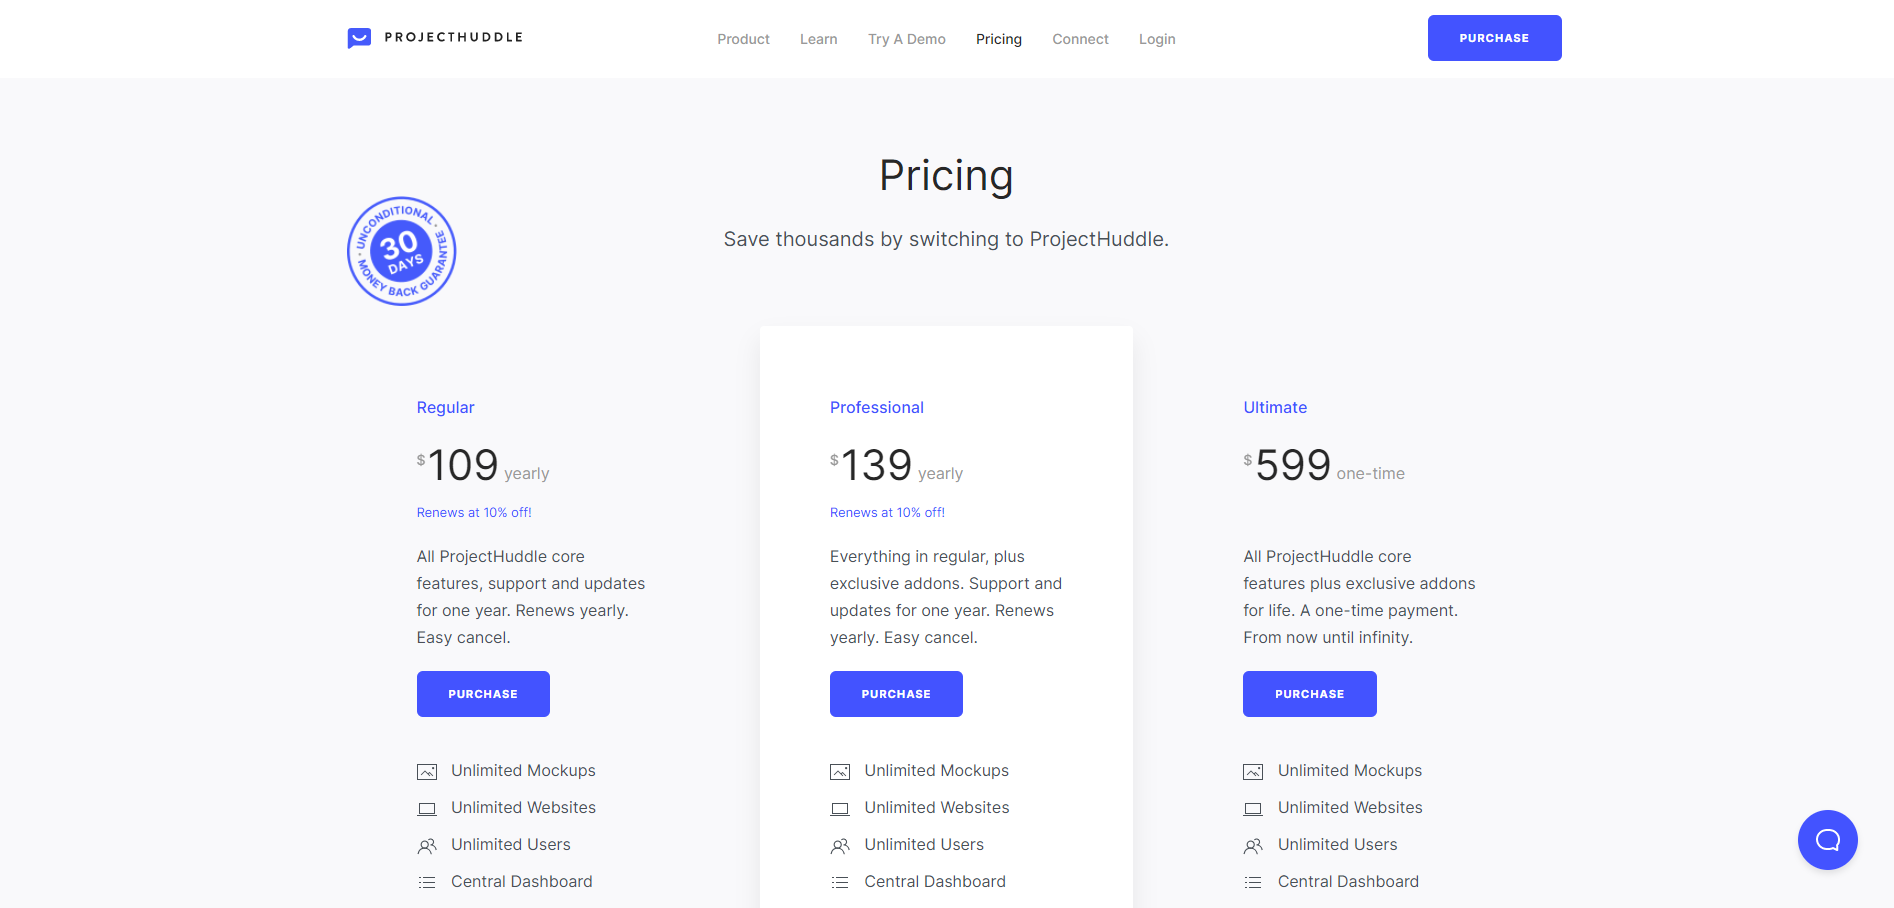 Projecthuddle pricing page showing product features